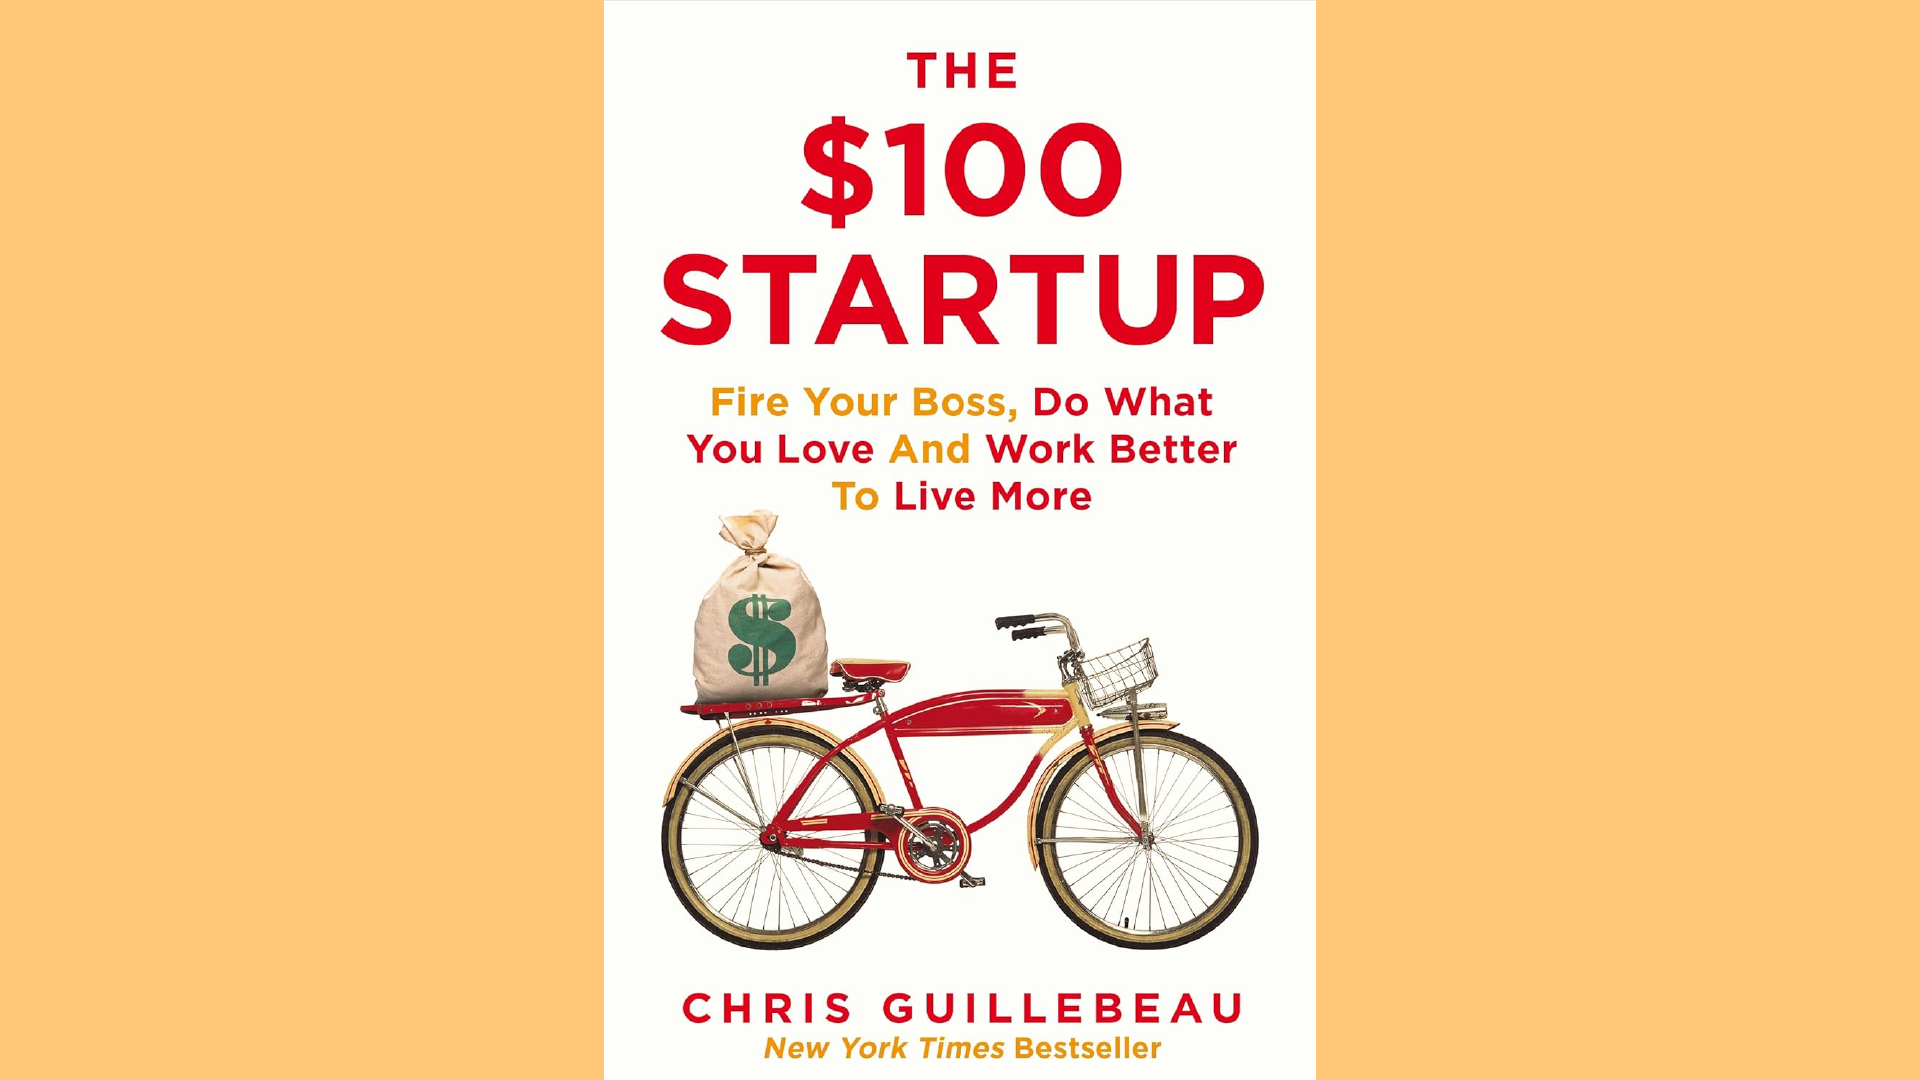 Summary: $100 Startup by Chris Guillebeau